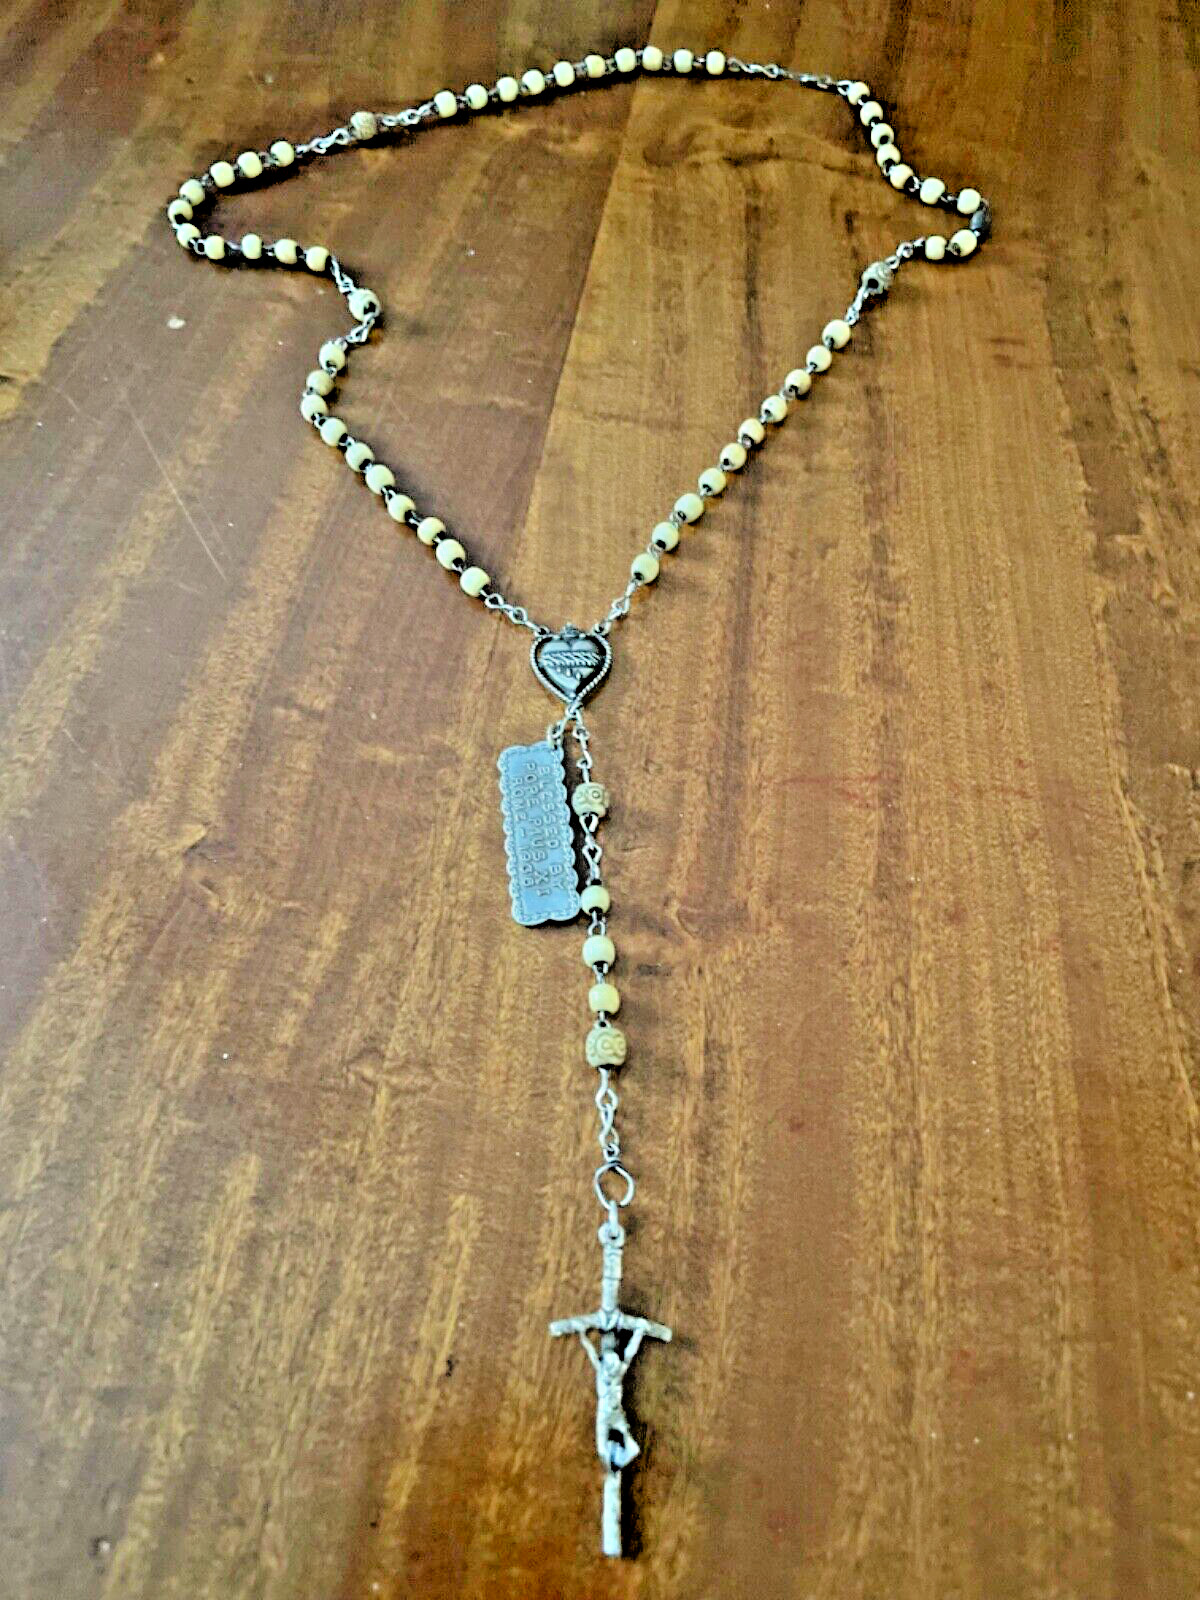 ANTIQUE BLESSED BY POPE PIUS XI ROSARY~ROME 1936